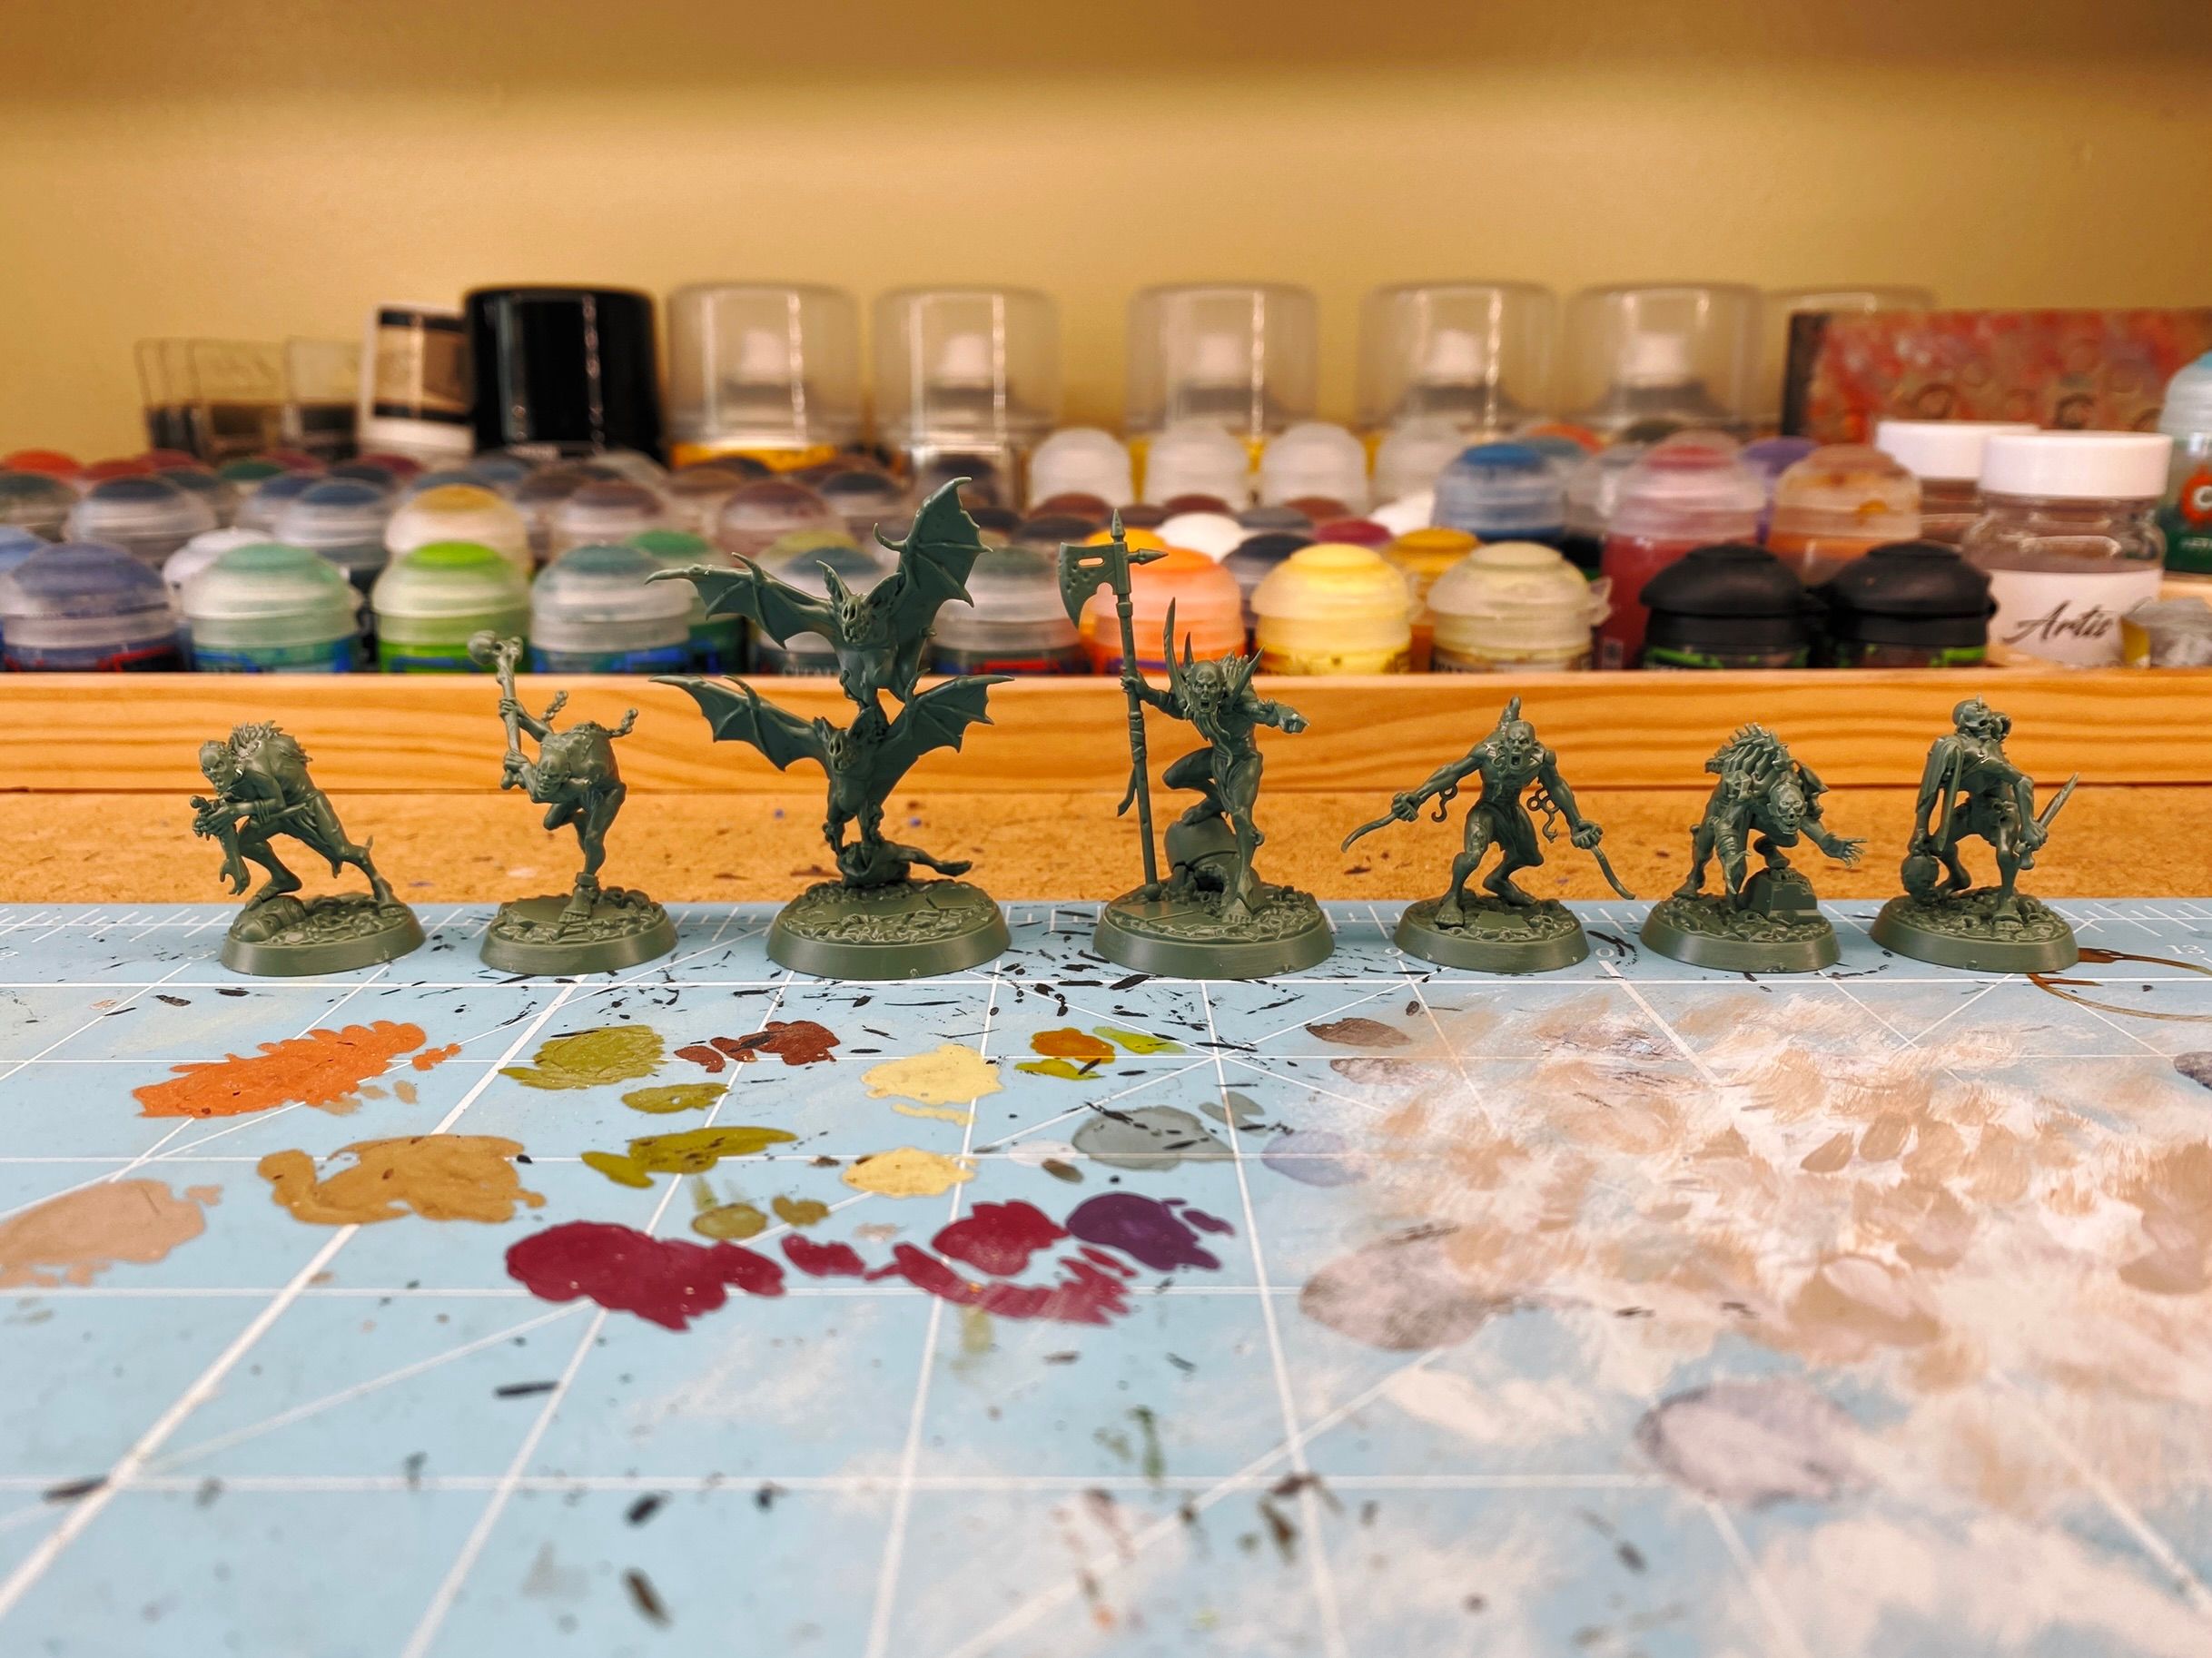 A photo of the Grymwatch warband assembled, in sickly green plastic. Seven miniatures, six are zombies, one's holding an axe and pointing, the others are hunched over in various poses. There's also a pair of very large bats.